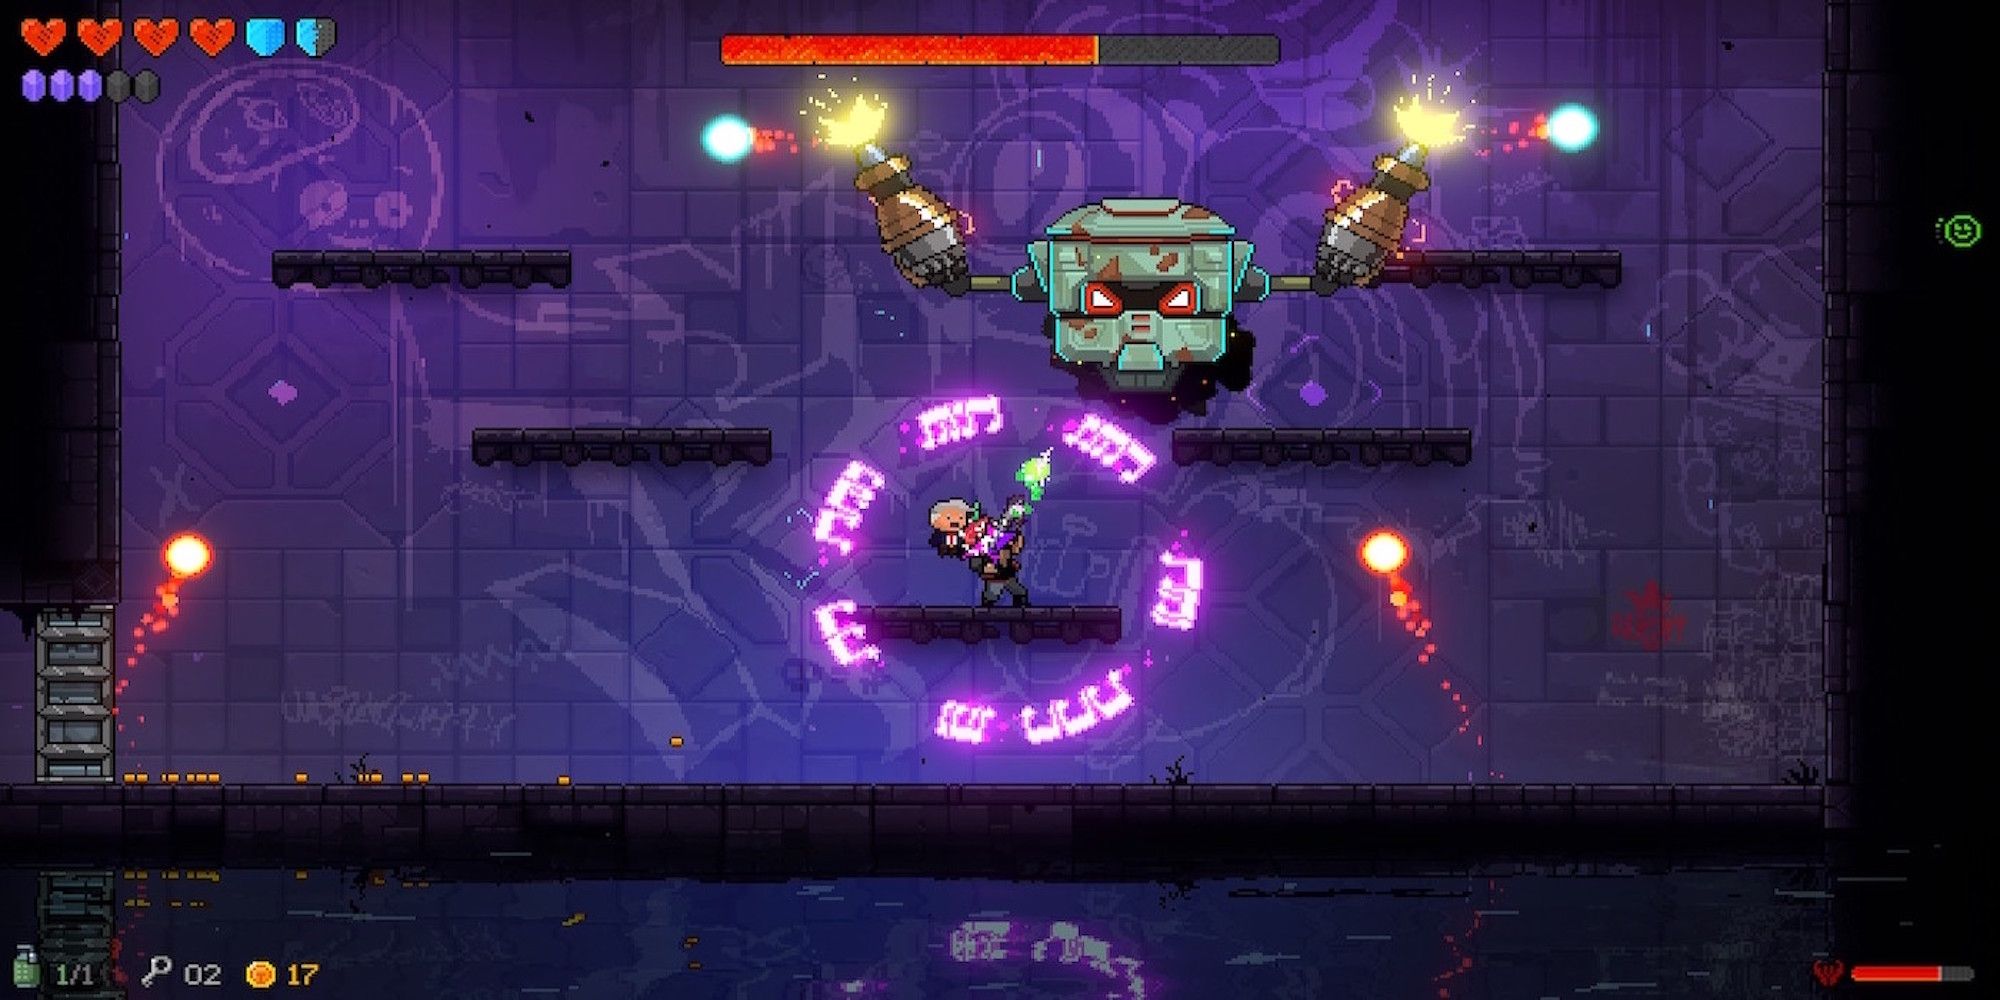 Fighting a boss in Neon Abyss